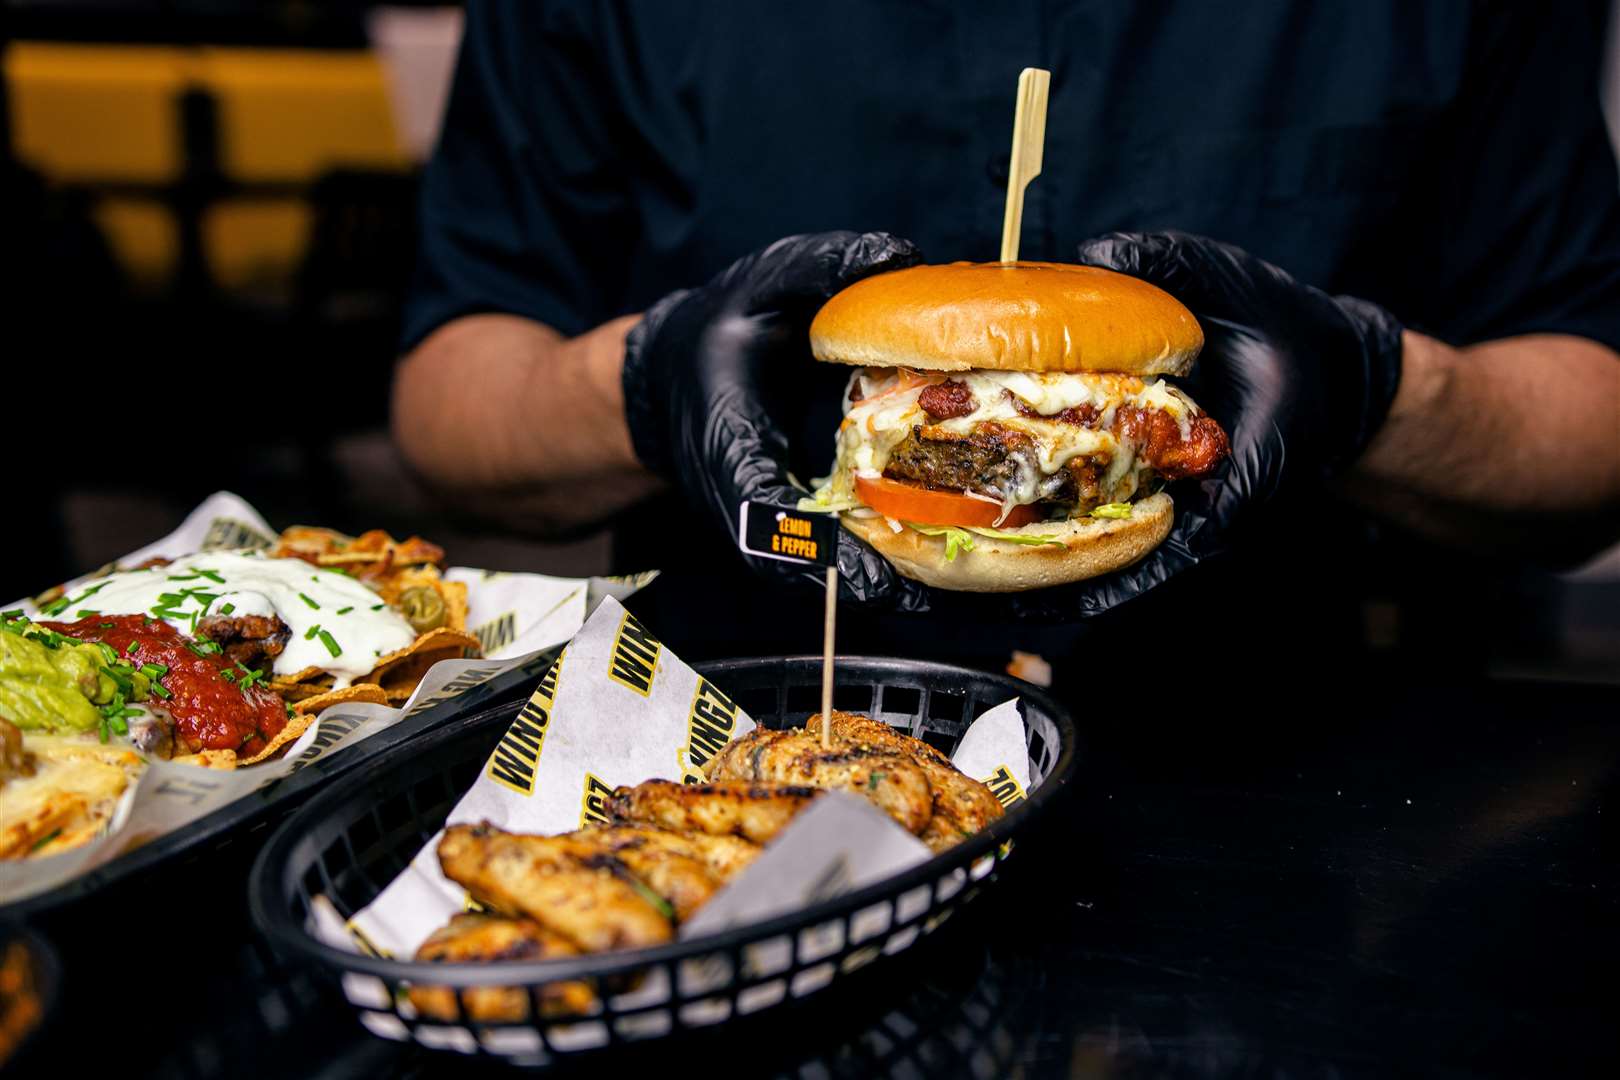 Some of the food Wing Kingz will provide Canterbury with. Pic: Aaron Murrell